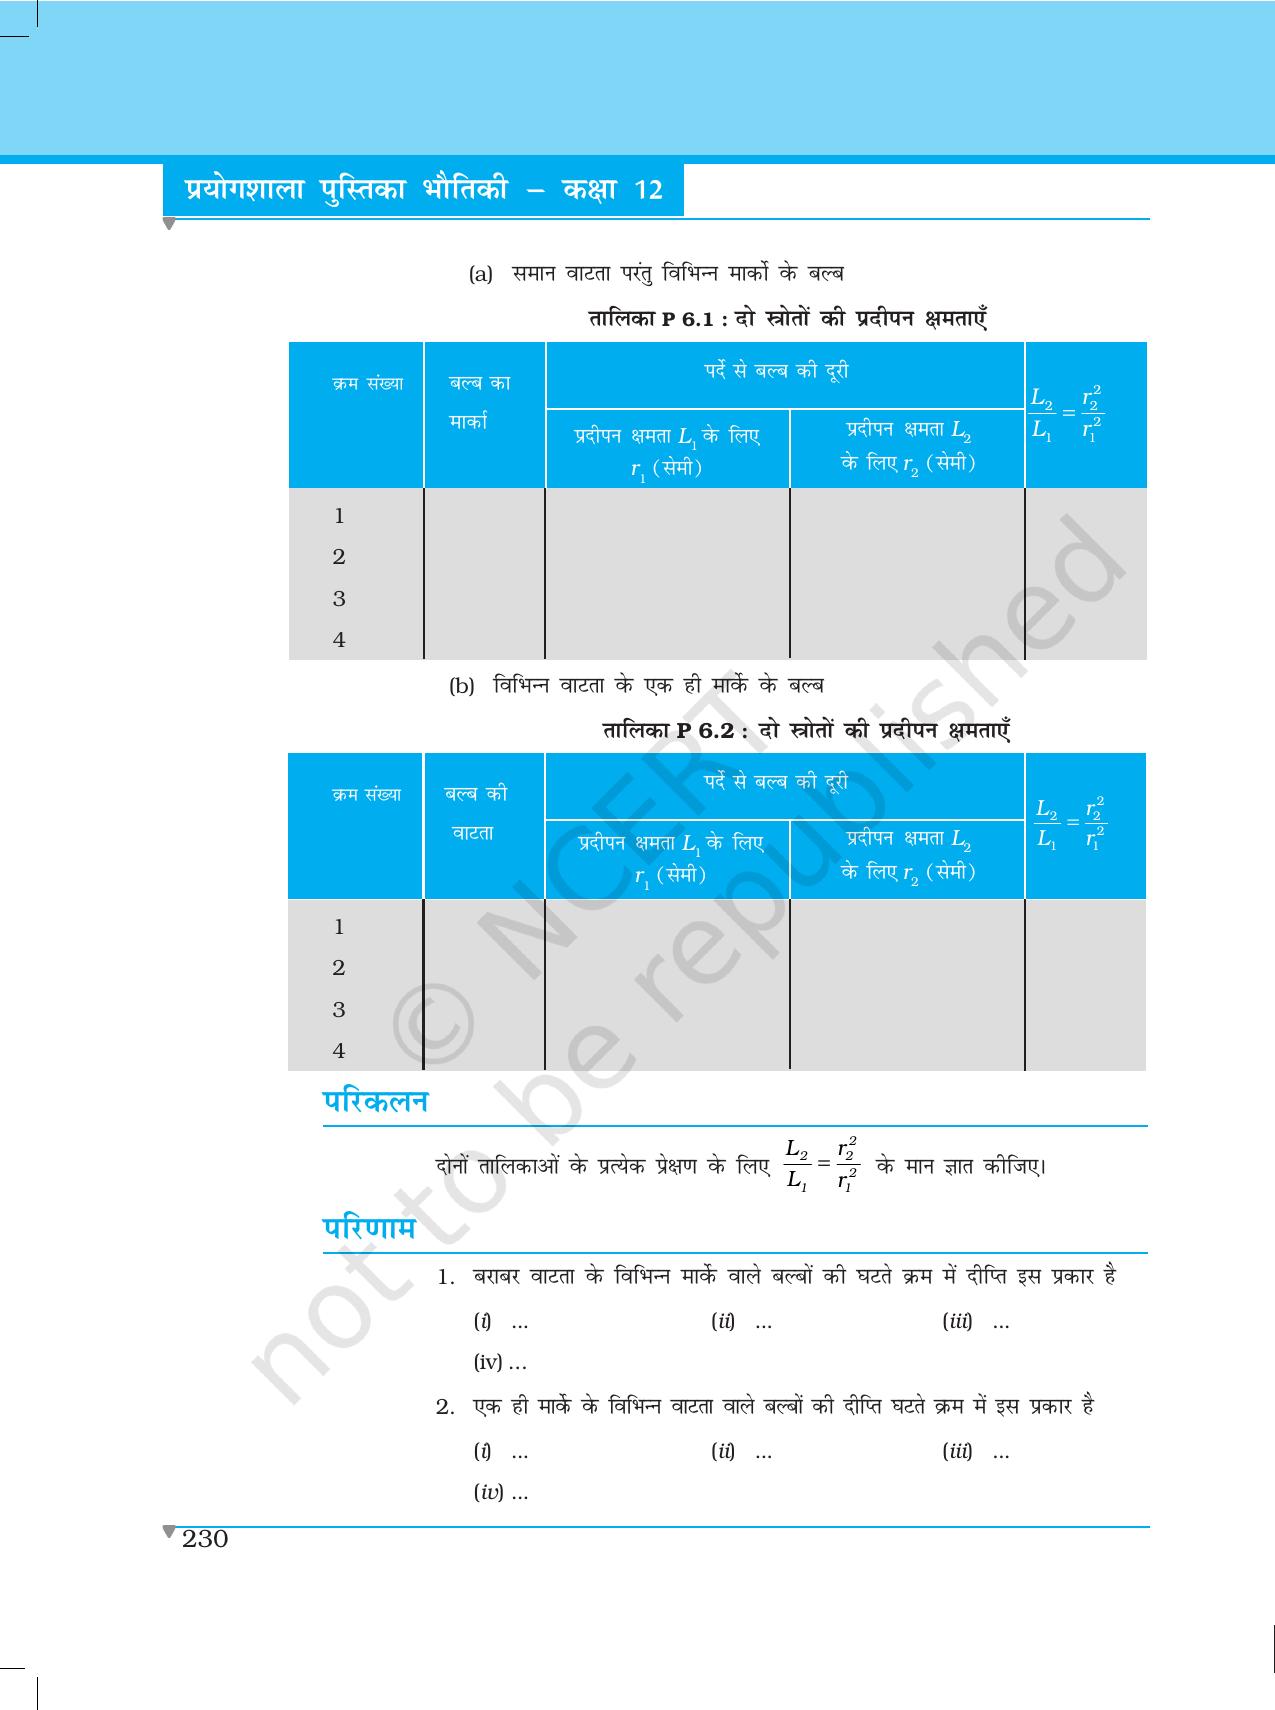 NCERT Laboratory Manuals for Class XII भौतिकी - परियोजना (1 - 7) - Page 24